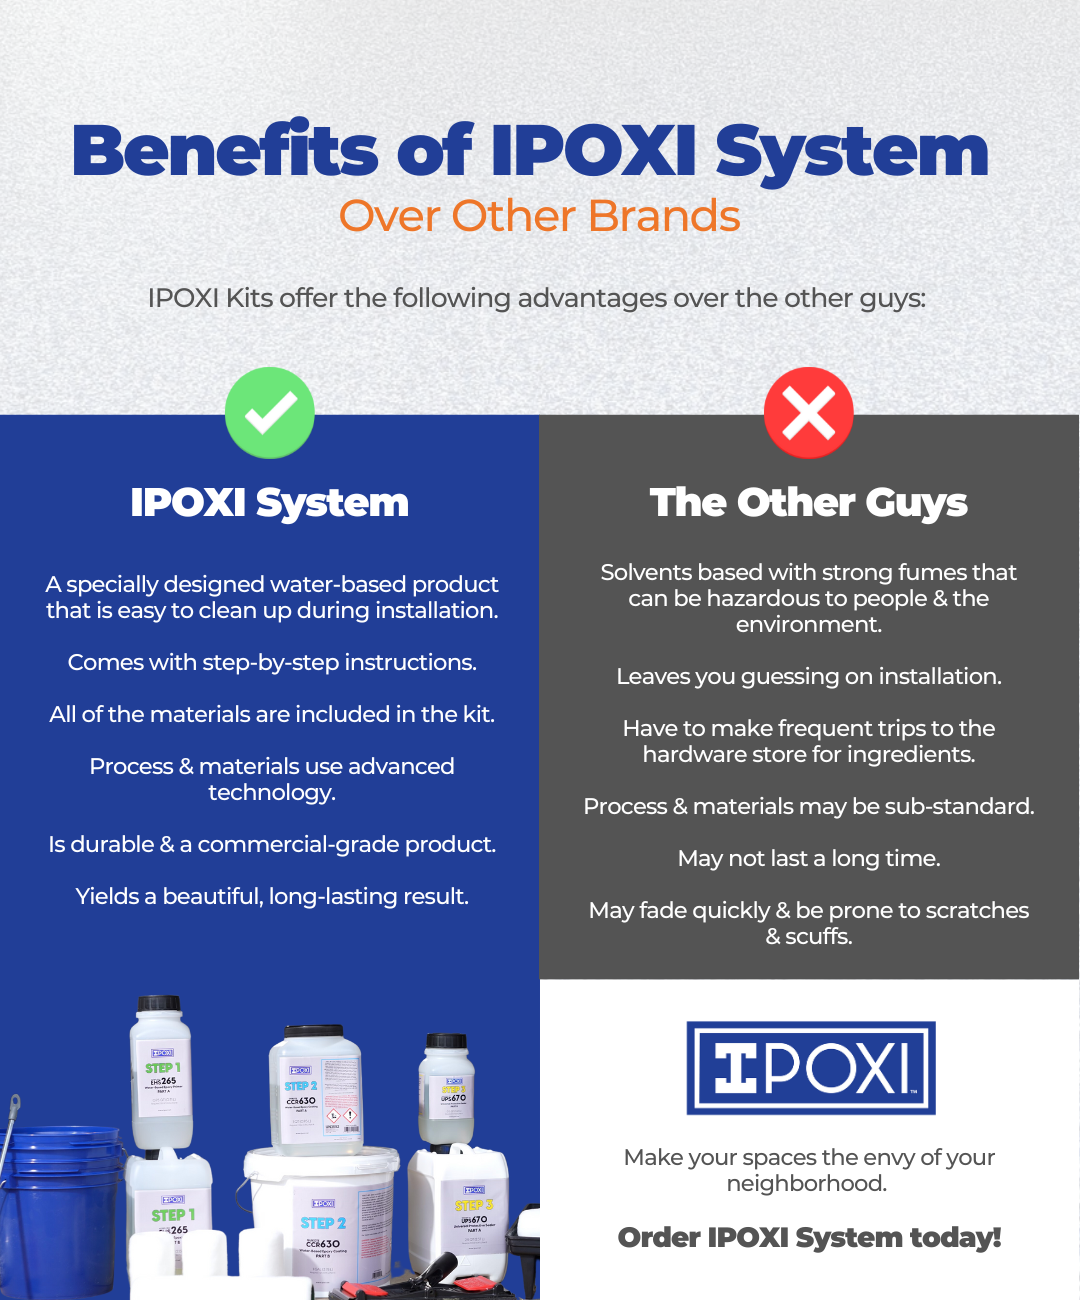 infographic M38352 - IPOXI - Benefits of IPOXI System Over Other Brands.png